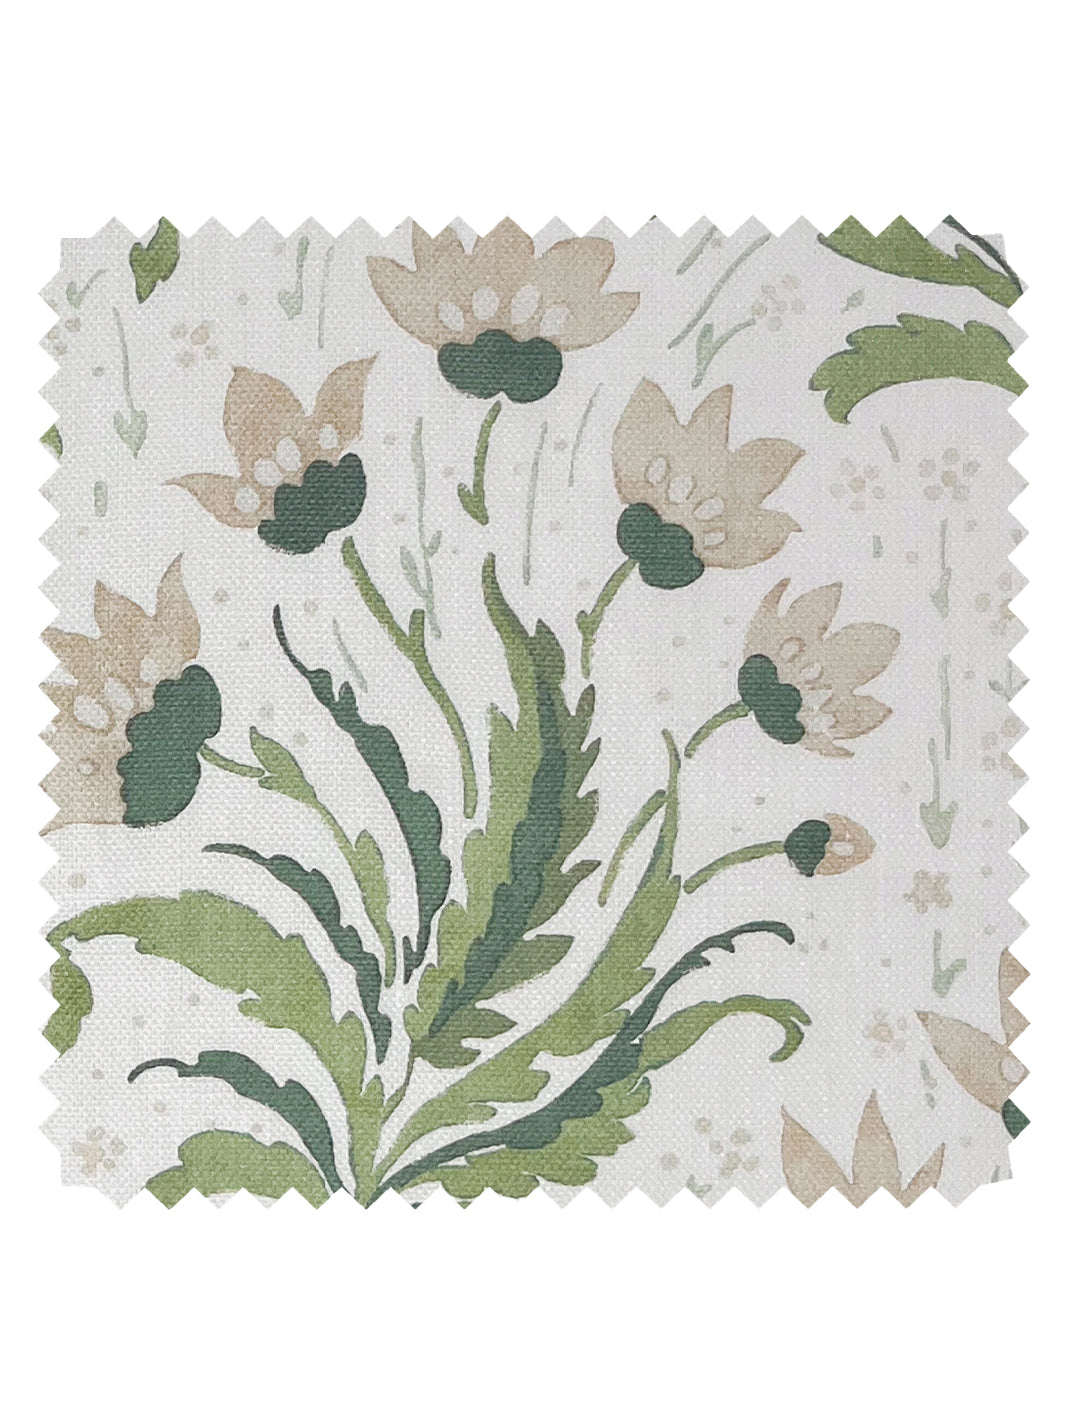 'Hillhouse Floral Multi' Linen Fabric by Nathan Turner - Neutral Green